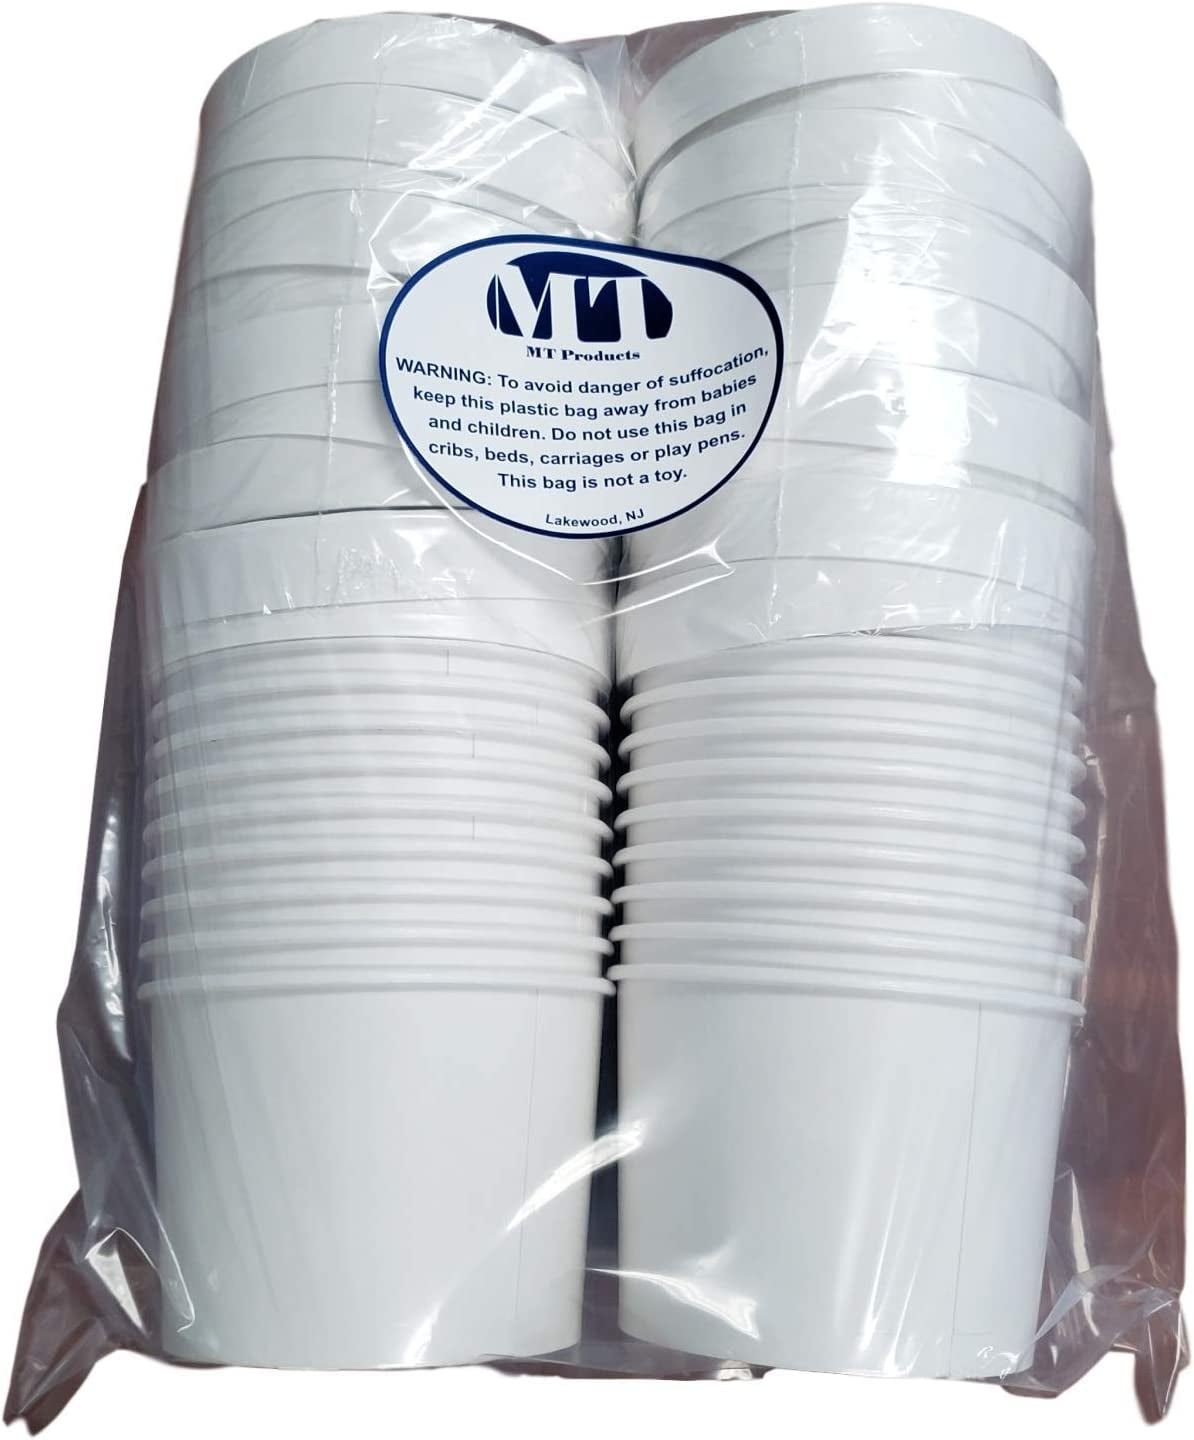 MT Products 16 oz White Paper Cups with Plastic Lids